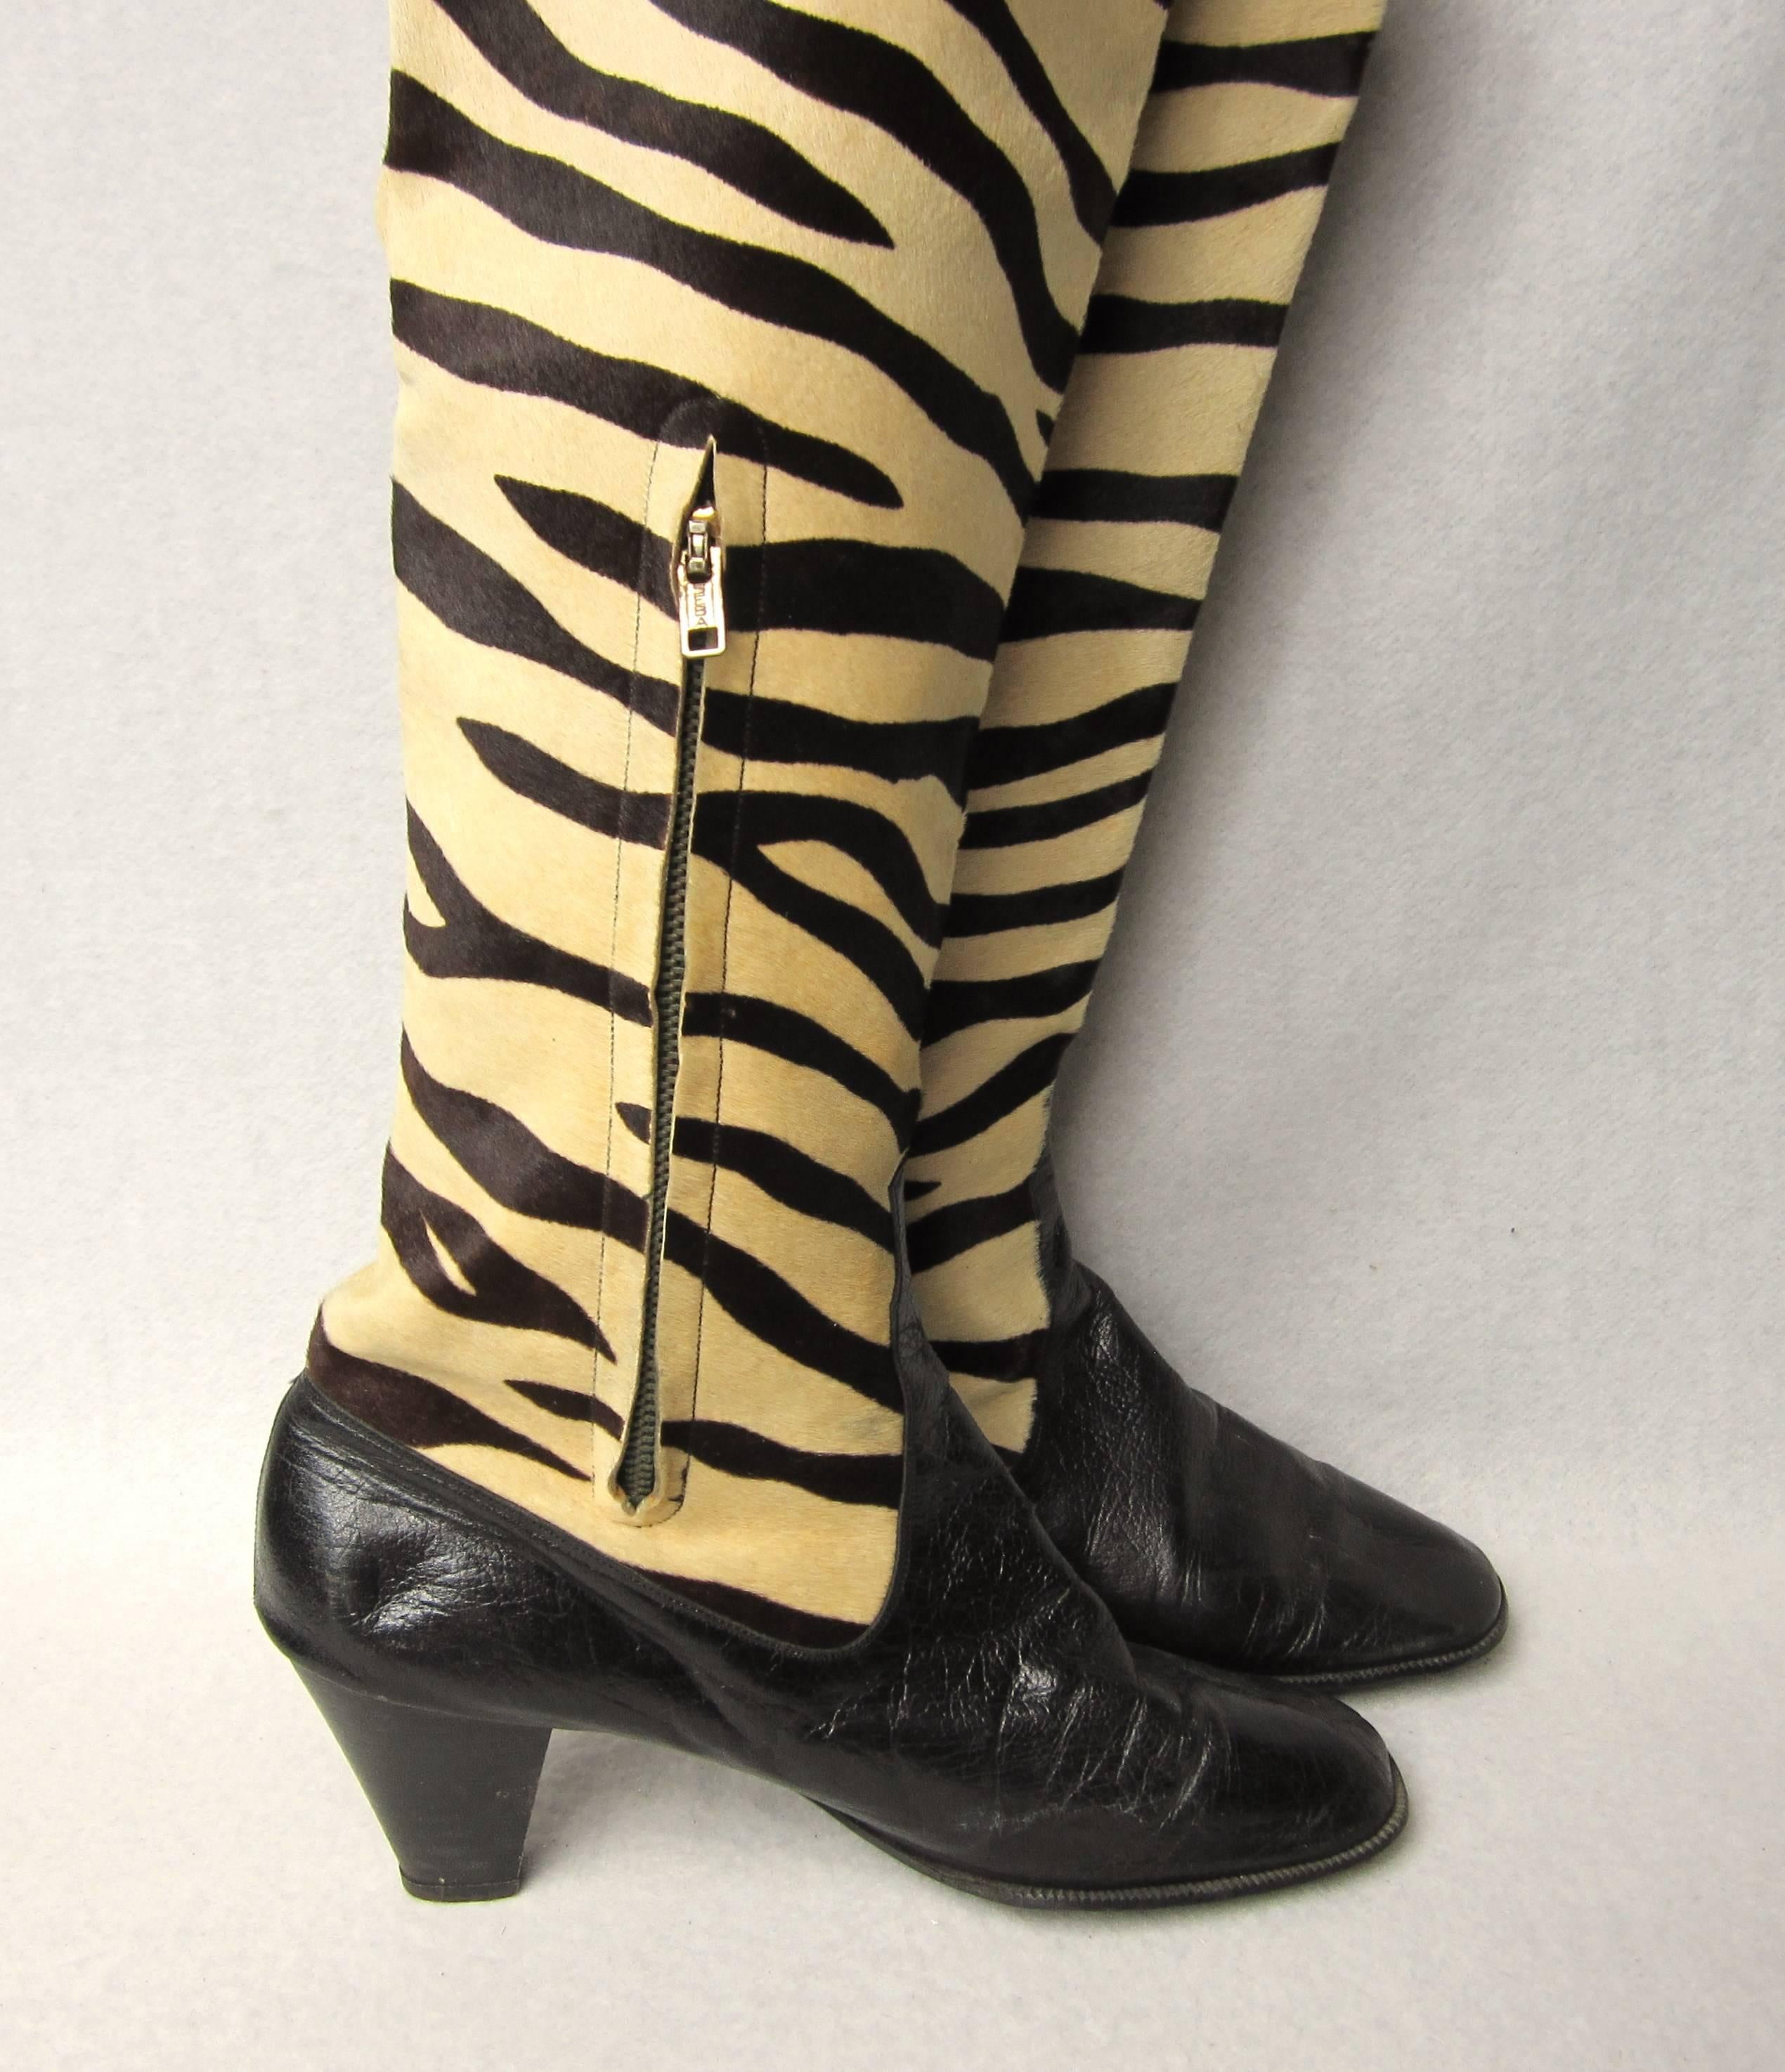 Pair Of Vintage Fur Zebra Print Boots Go-Go Baby! from the 60s to early 1970s. Side zipper working fine. Please refer to the measurements, no size labeled in the boots. 3.25 in.  wide under the sole - 10.5 in.  long toe to heel- 16.25 in. High (